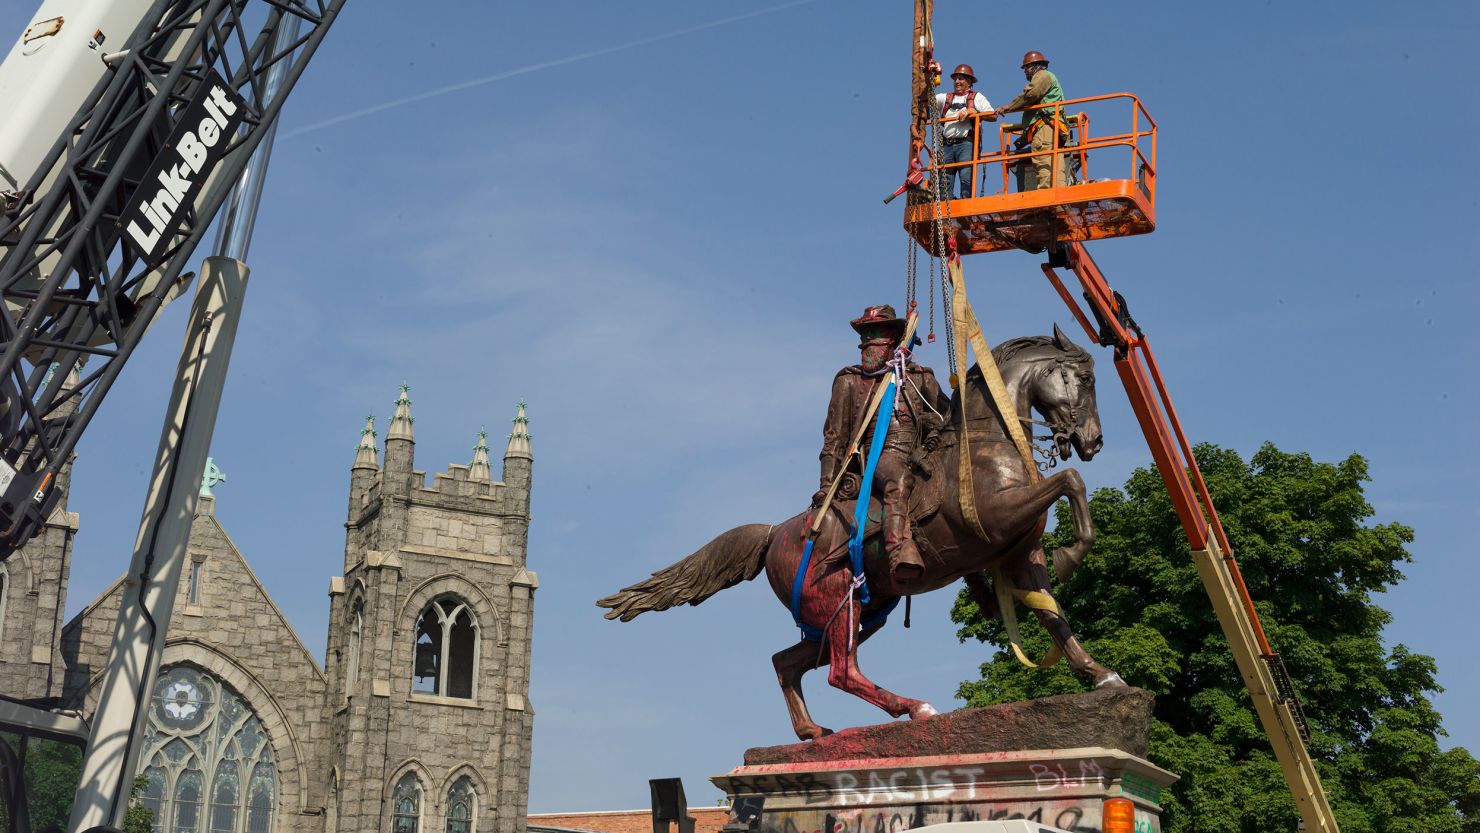 A construction crew takes down the statue of Confederate Calvary General JEB Stuart, along Monument Avenue on July 7, 2020 in Richmond, Virginia. The Andrew W. Mellon Foundation on Wednesday announced it is dedicating $250 million over the next five years to help "transform the way our country's histories are told in public spaces."